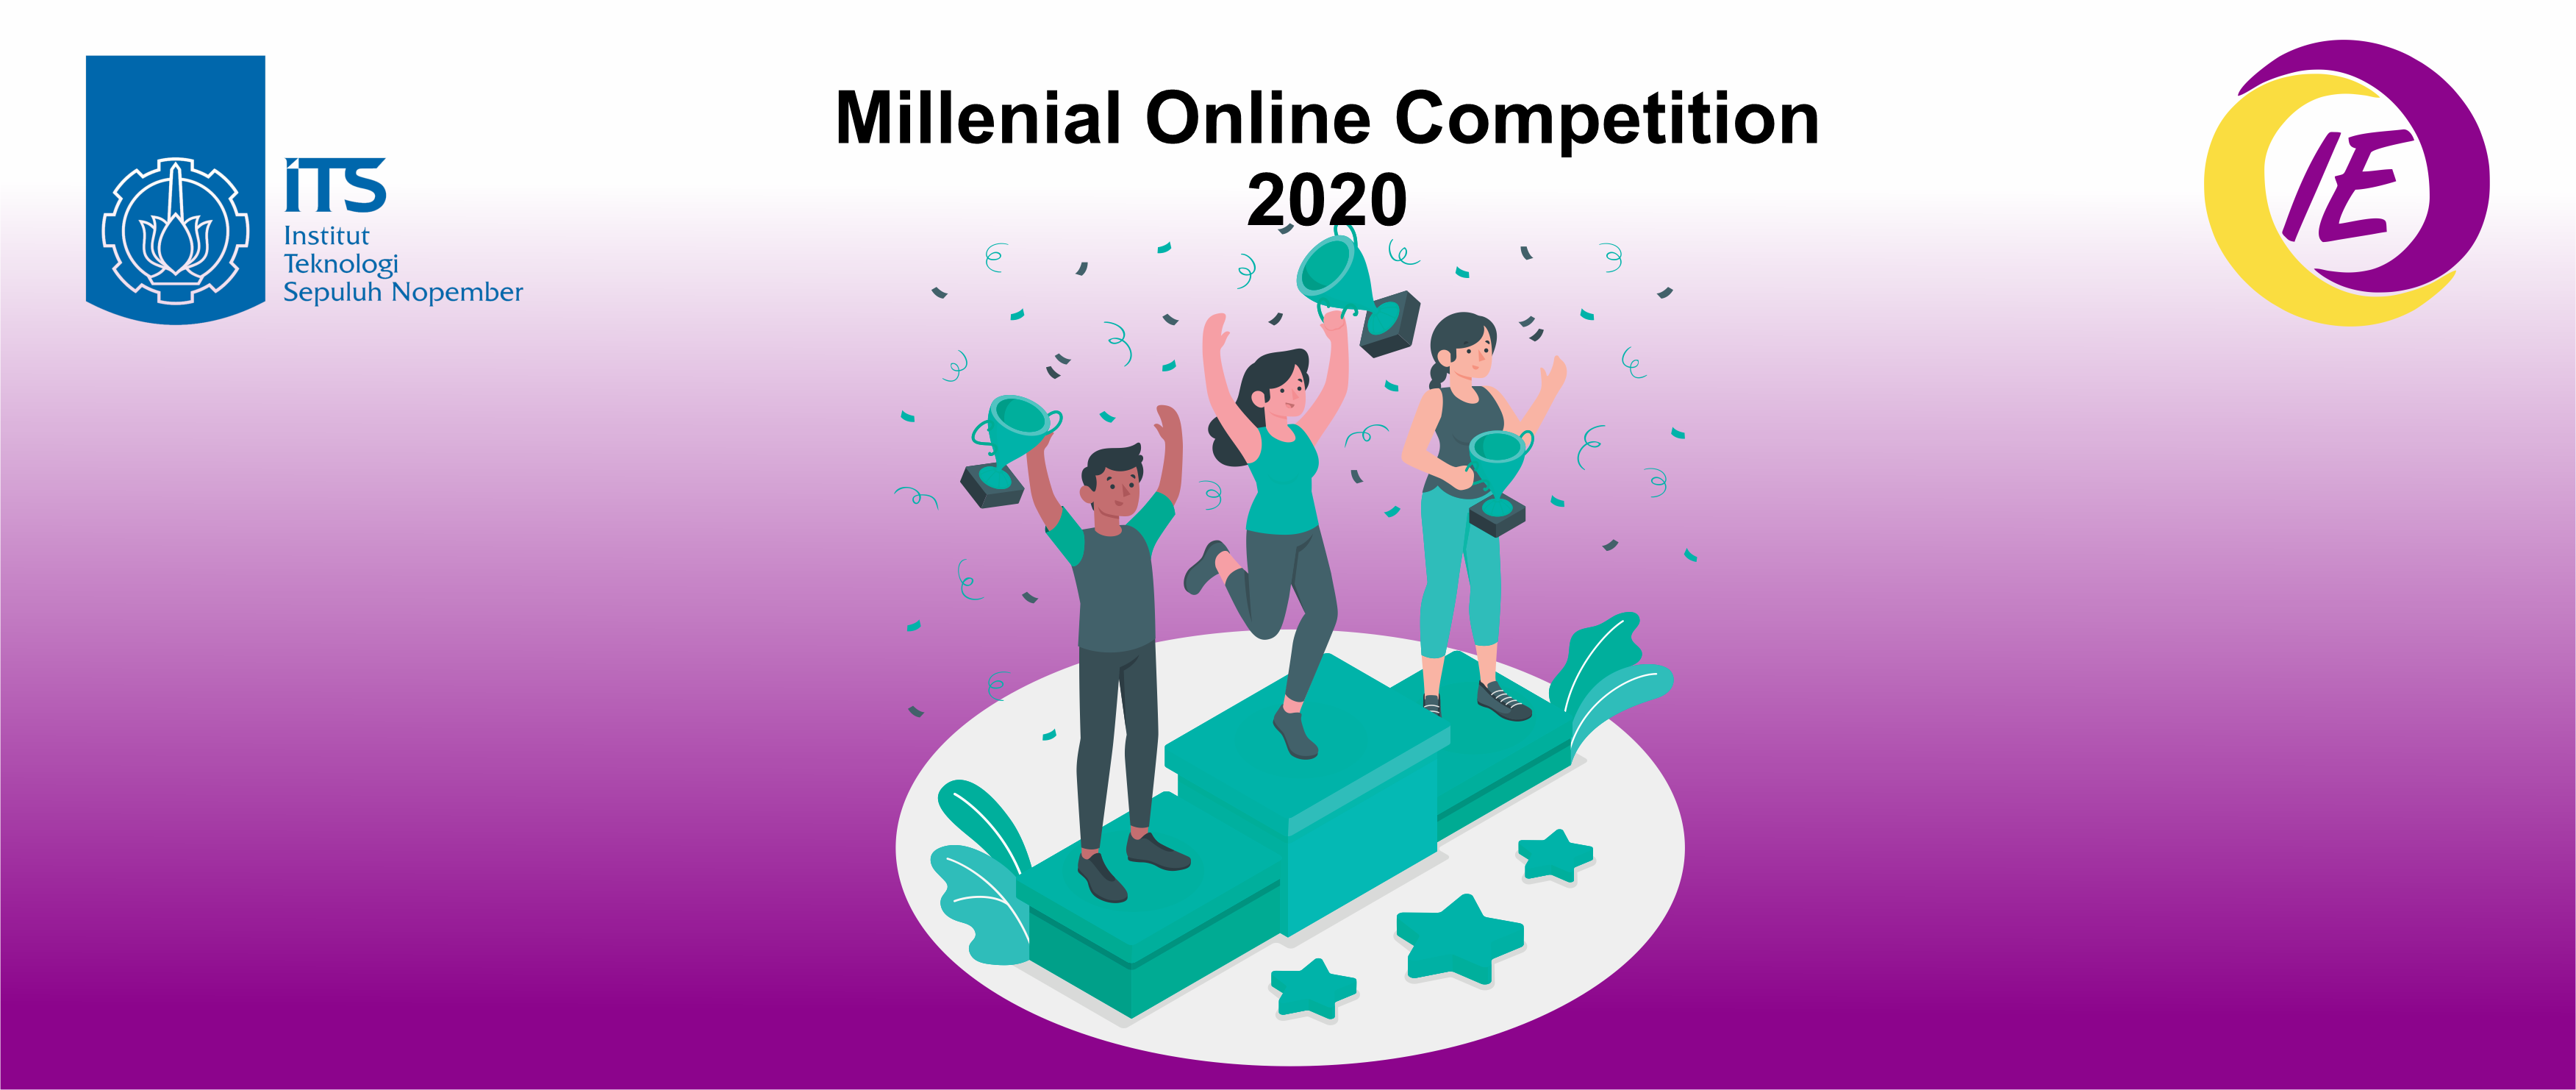 Флаг м Competition. Disney competitors 2020. Competitions 2020